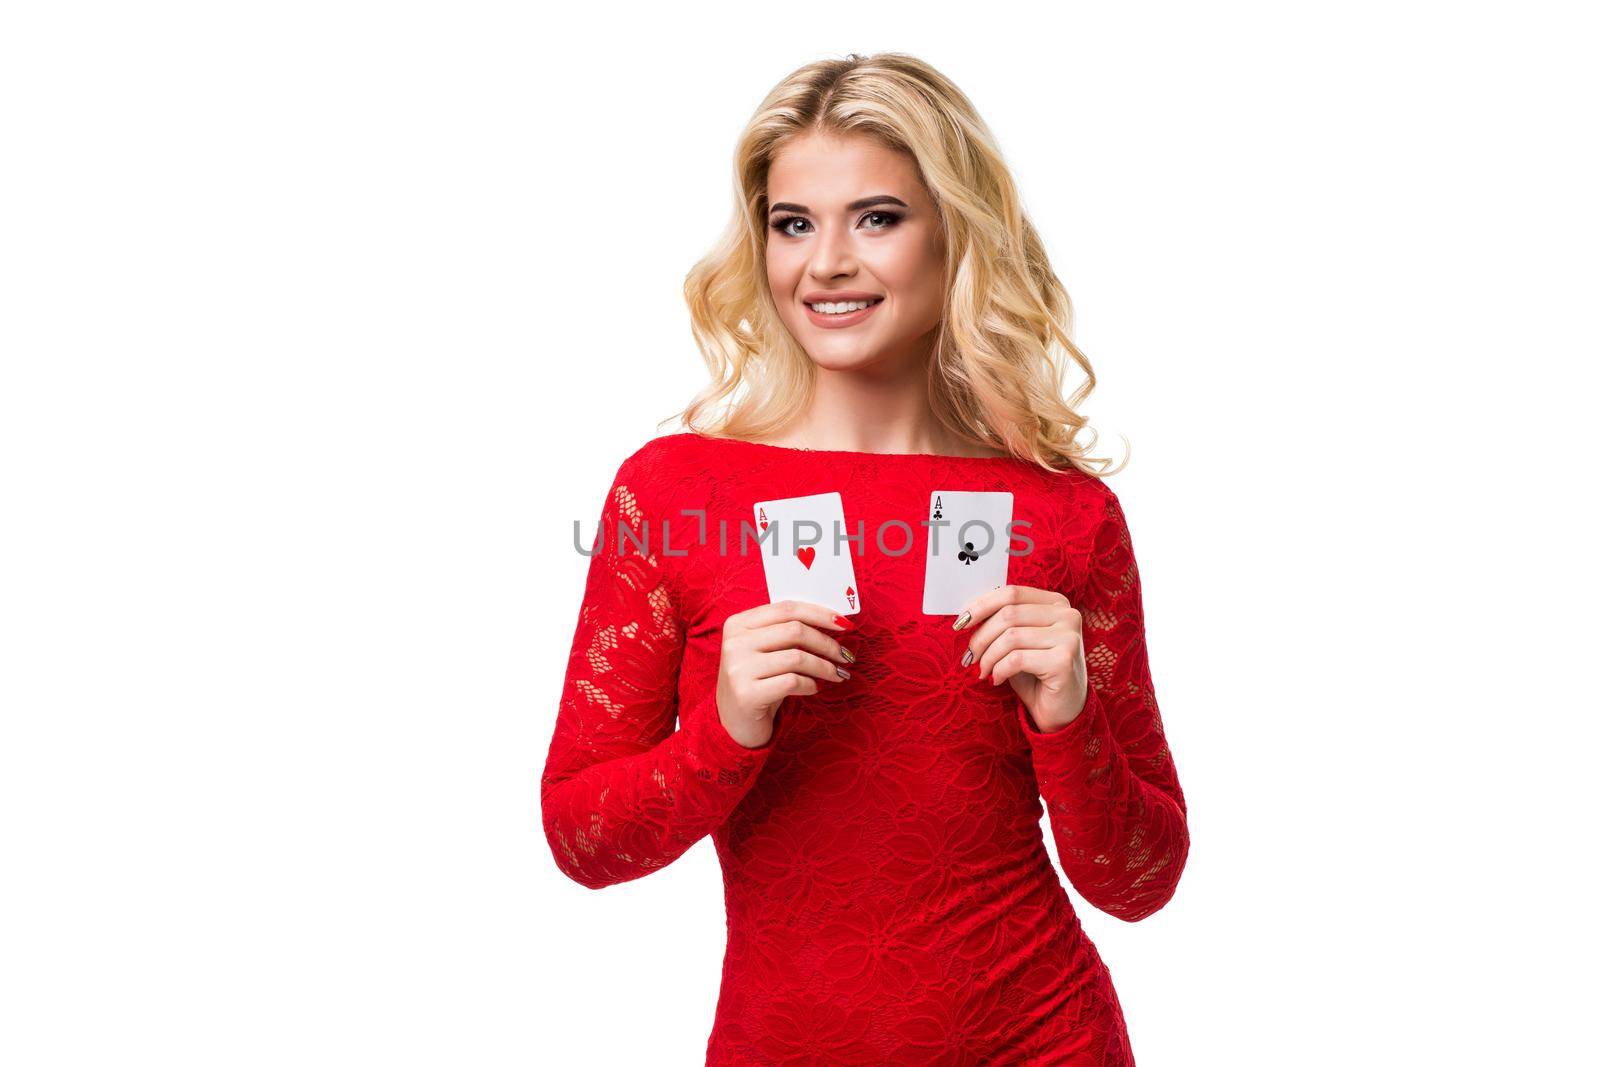 Caucasian young woman with long light blonde hair in evening outfit holding playing cards. Isolated on white background. Poker